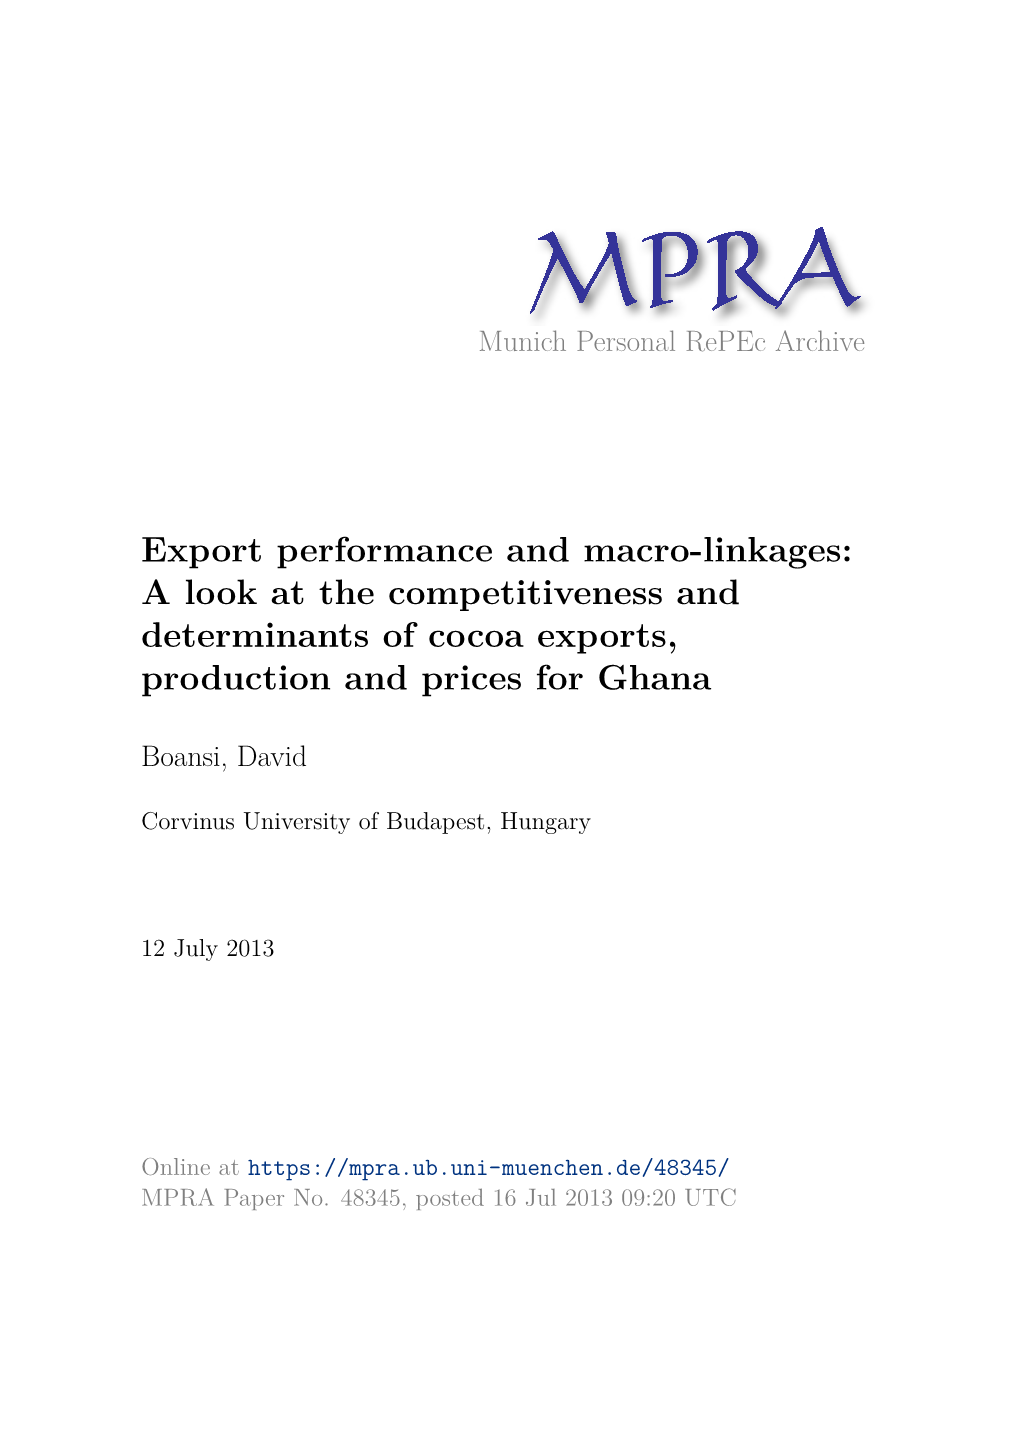 A Look at the Competitiveness and Determinants of Cocoa Exports, Production and Prices for Ghana